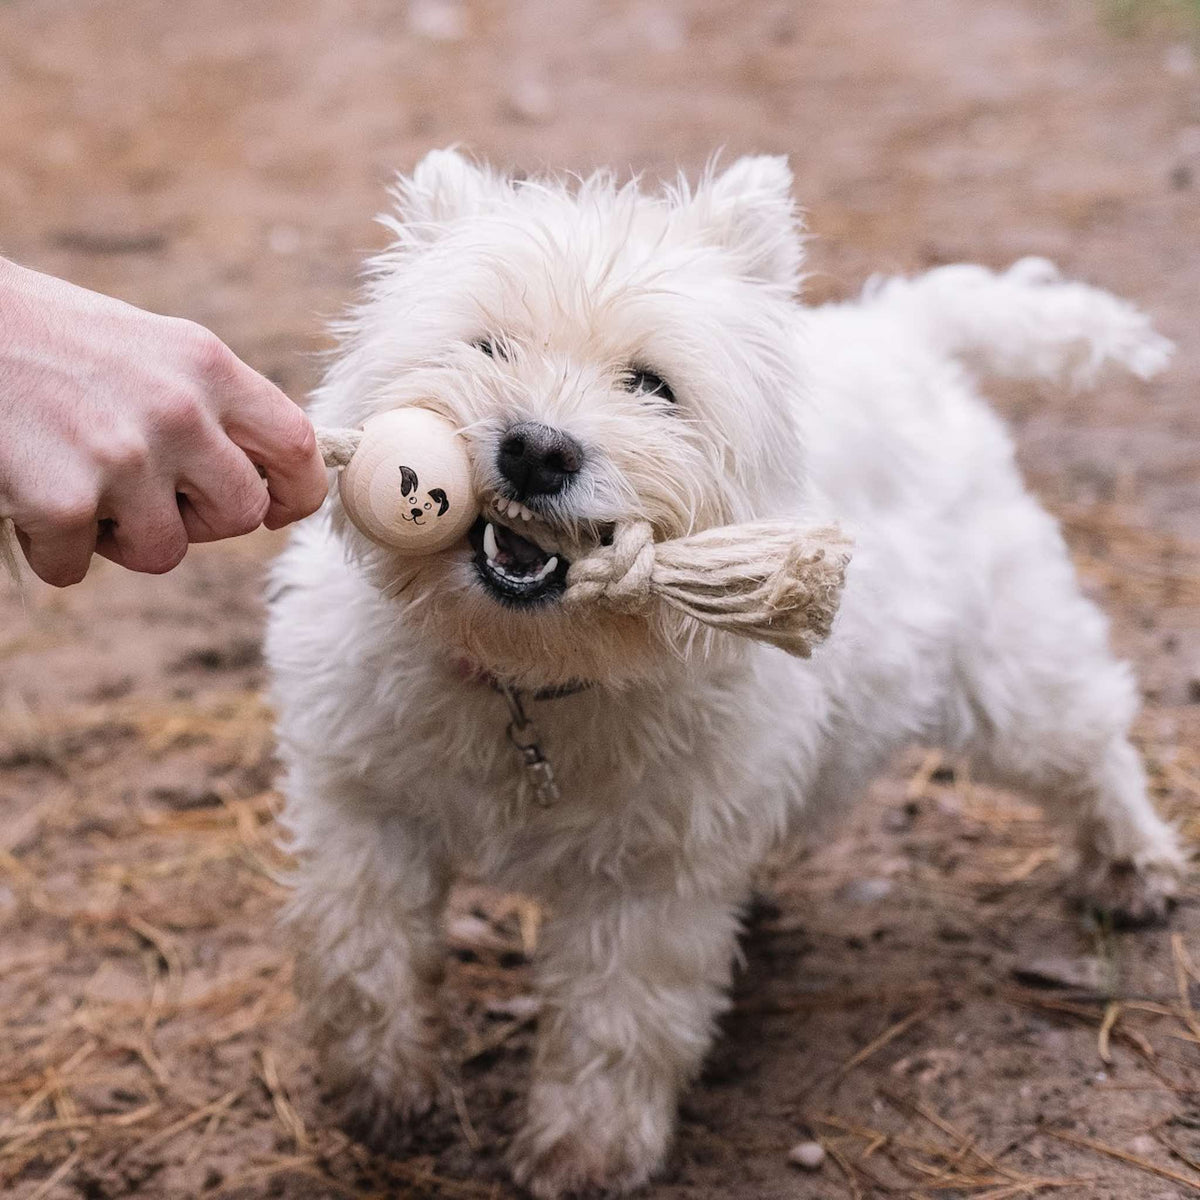 Dog Playing with Tug-A-Ball - Smug Mutts Natural Hemp Rope and Beech Wood Dog Toy, Natural and Eco Friendly Dog Toy